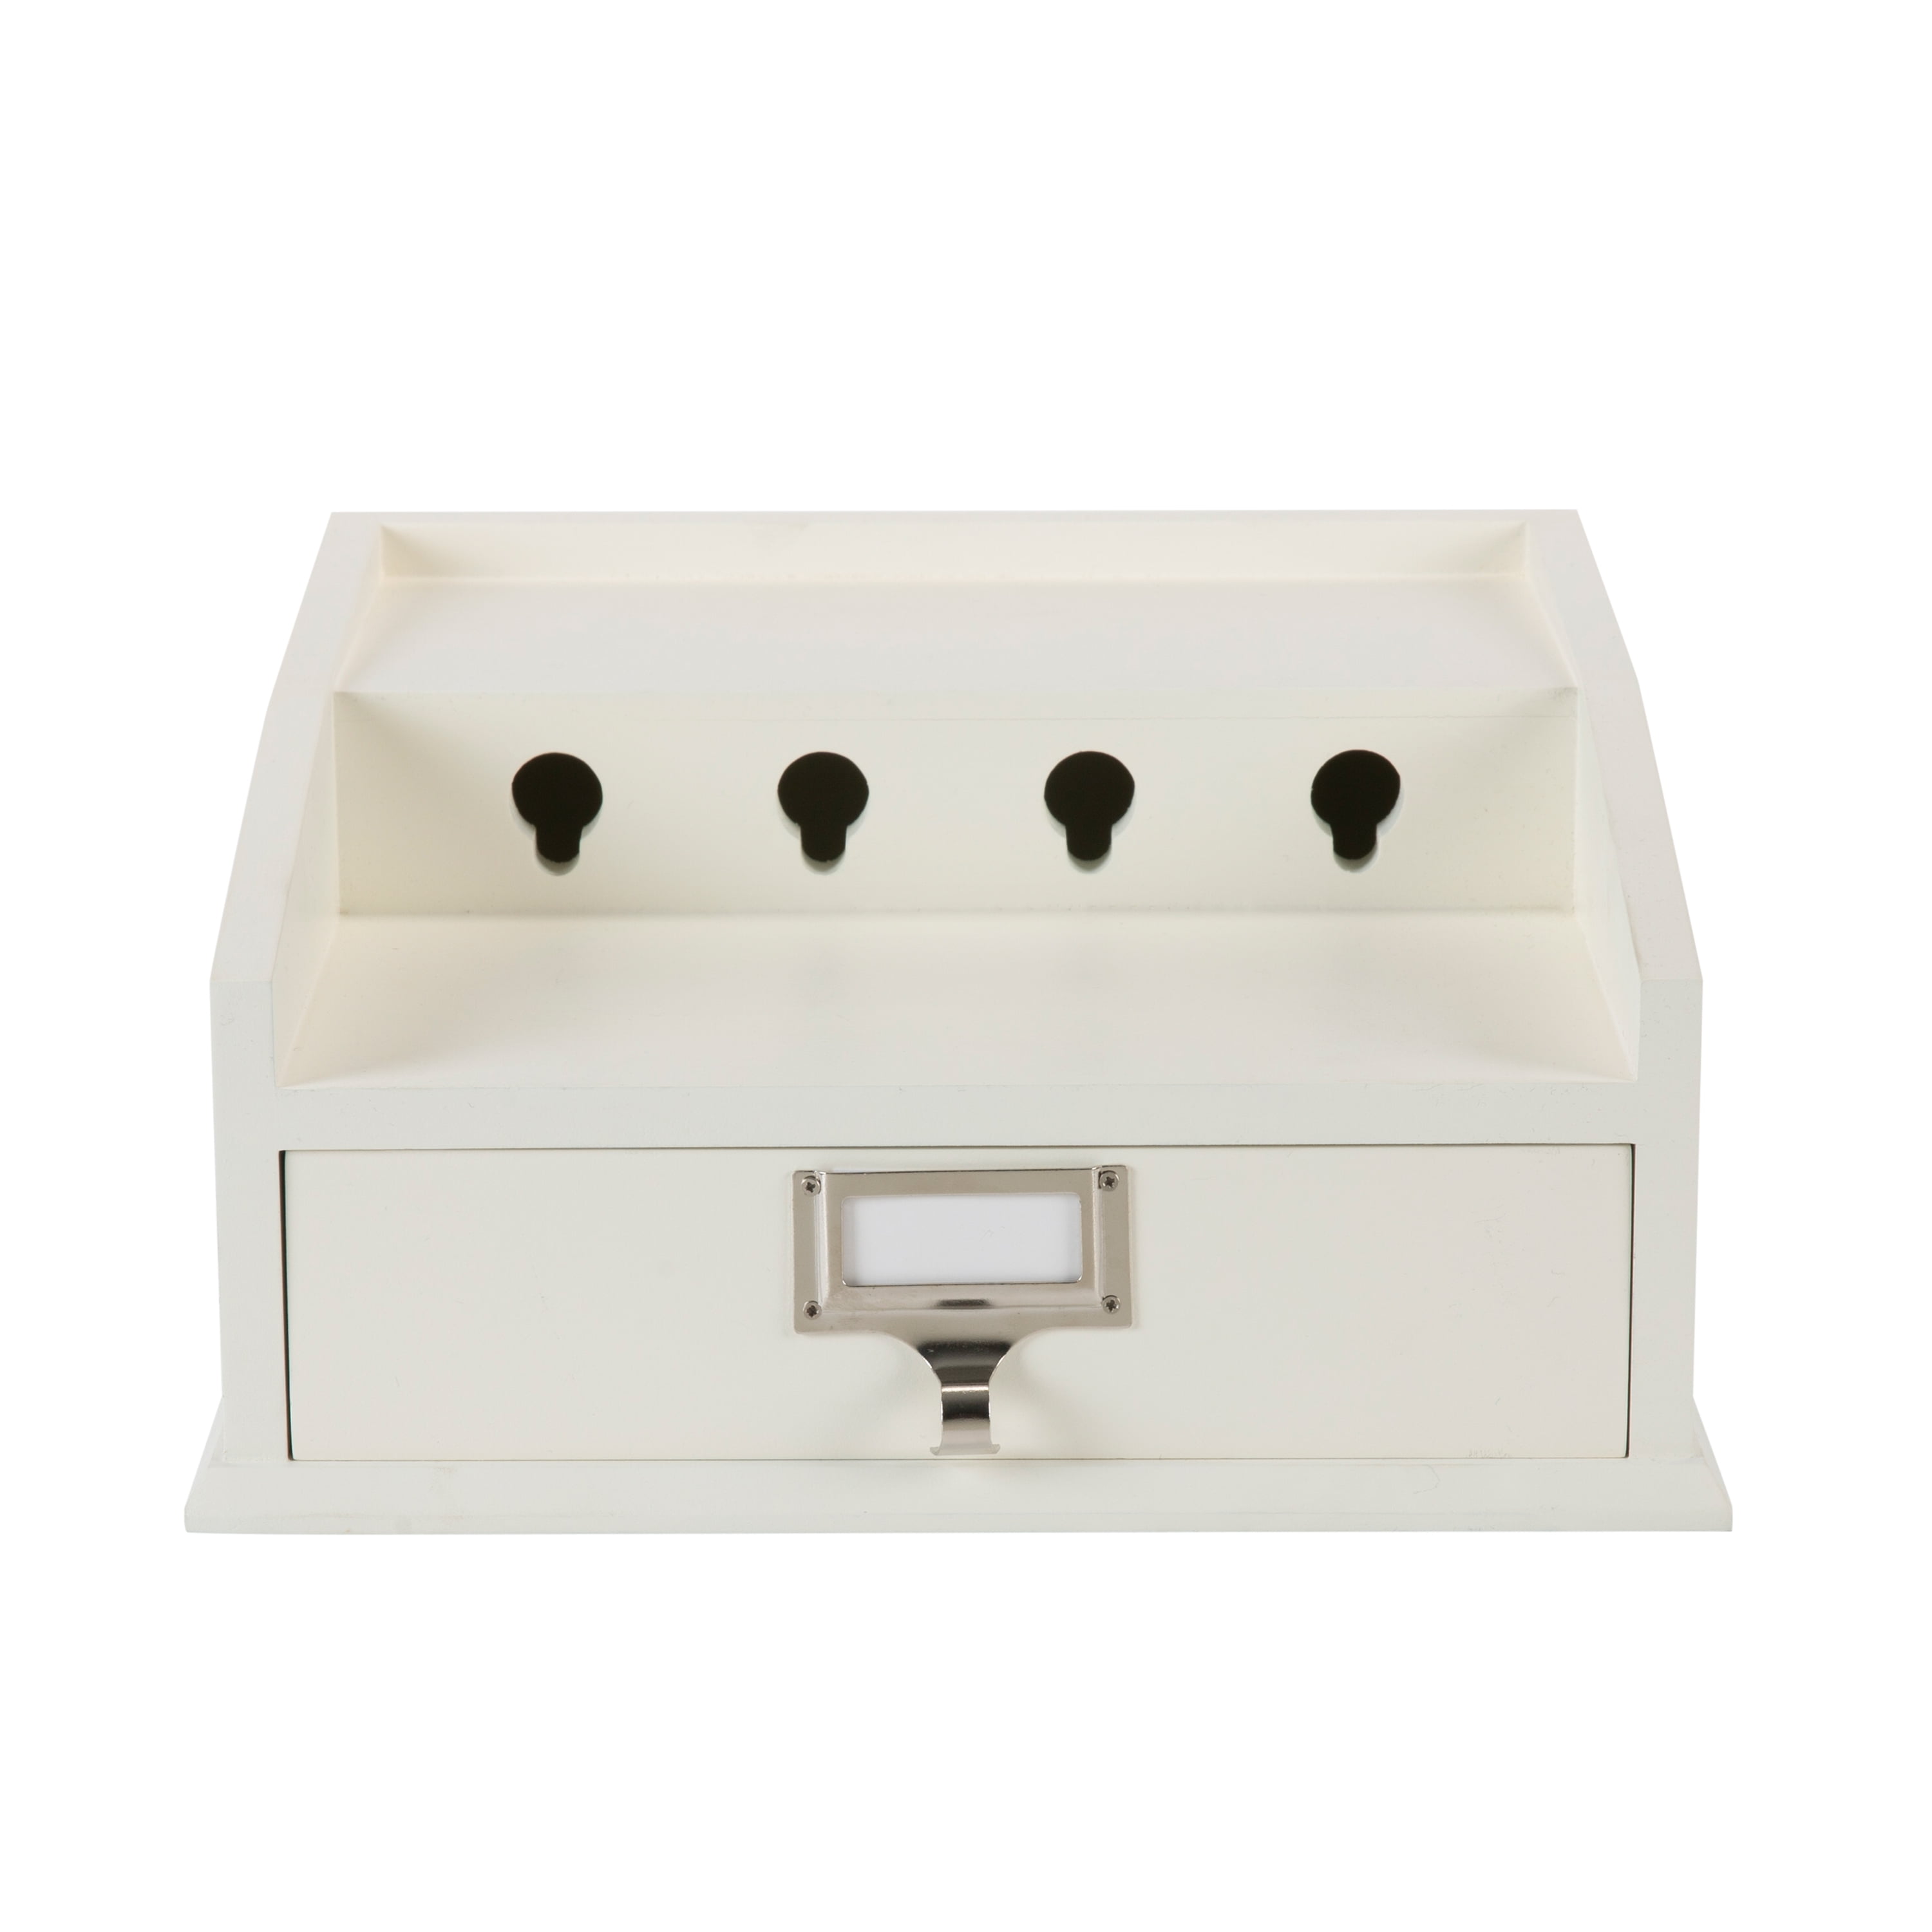 Photo 1 of *SEE last pictures for damage* 
Neu Home Electronics Charging Station Organizer with Drawer in White, 12 x 6 x 12 inches
